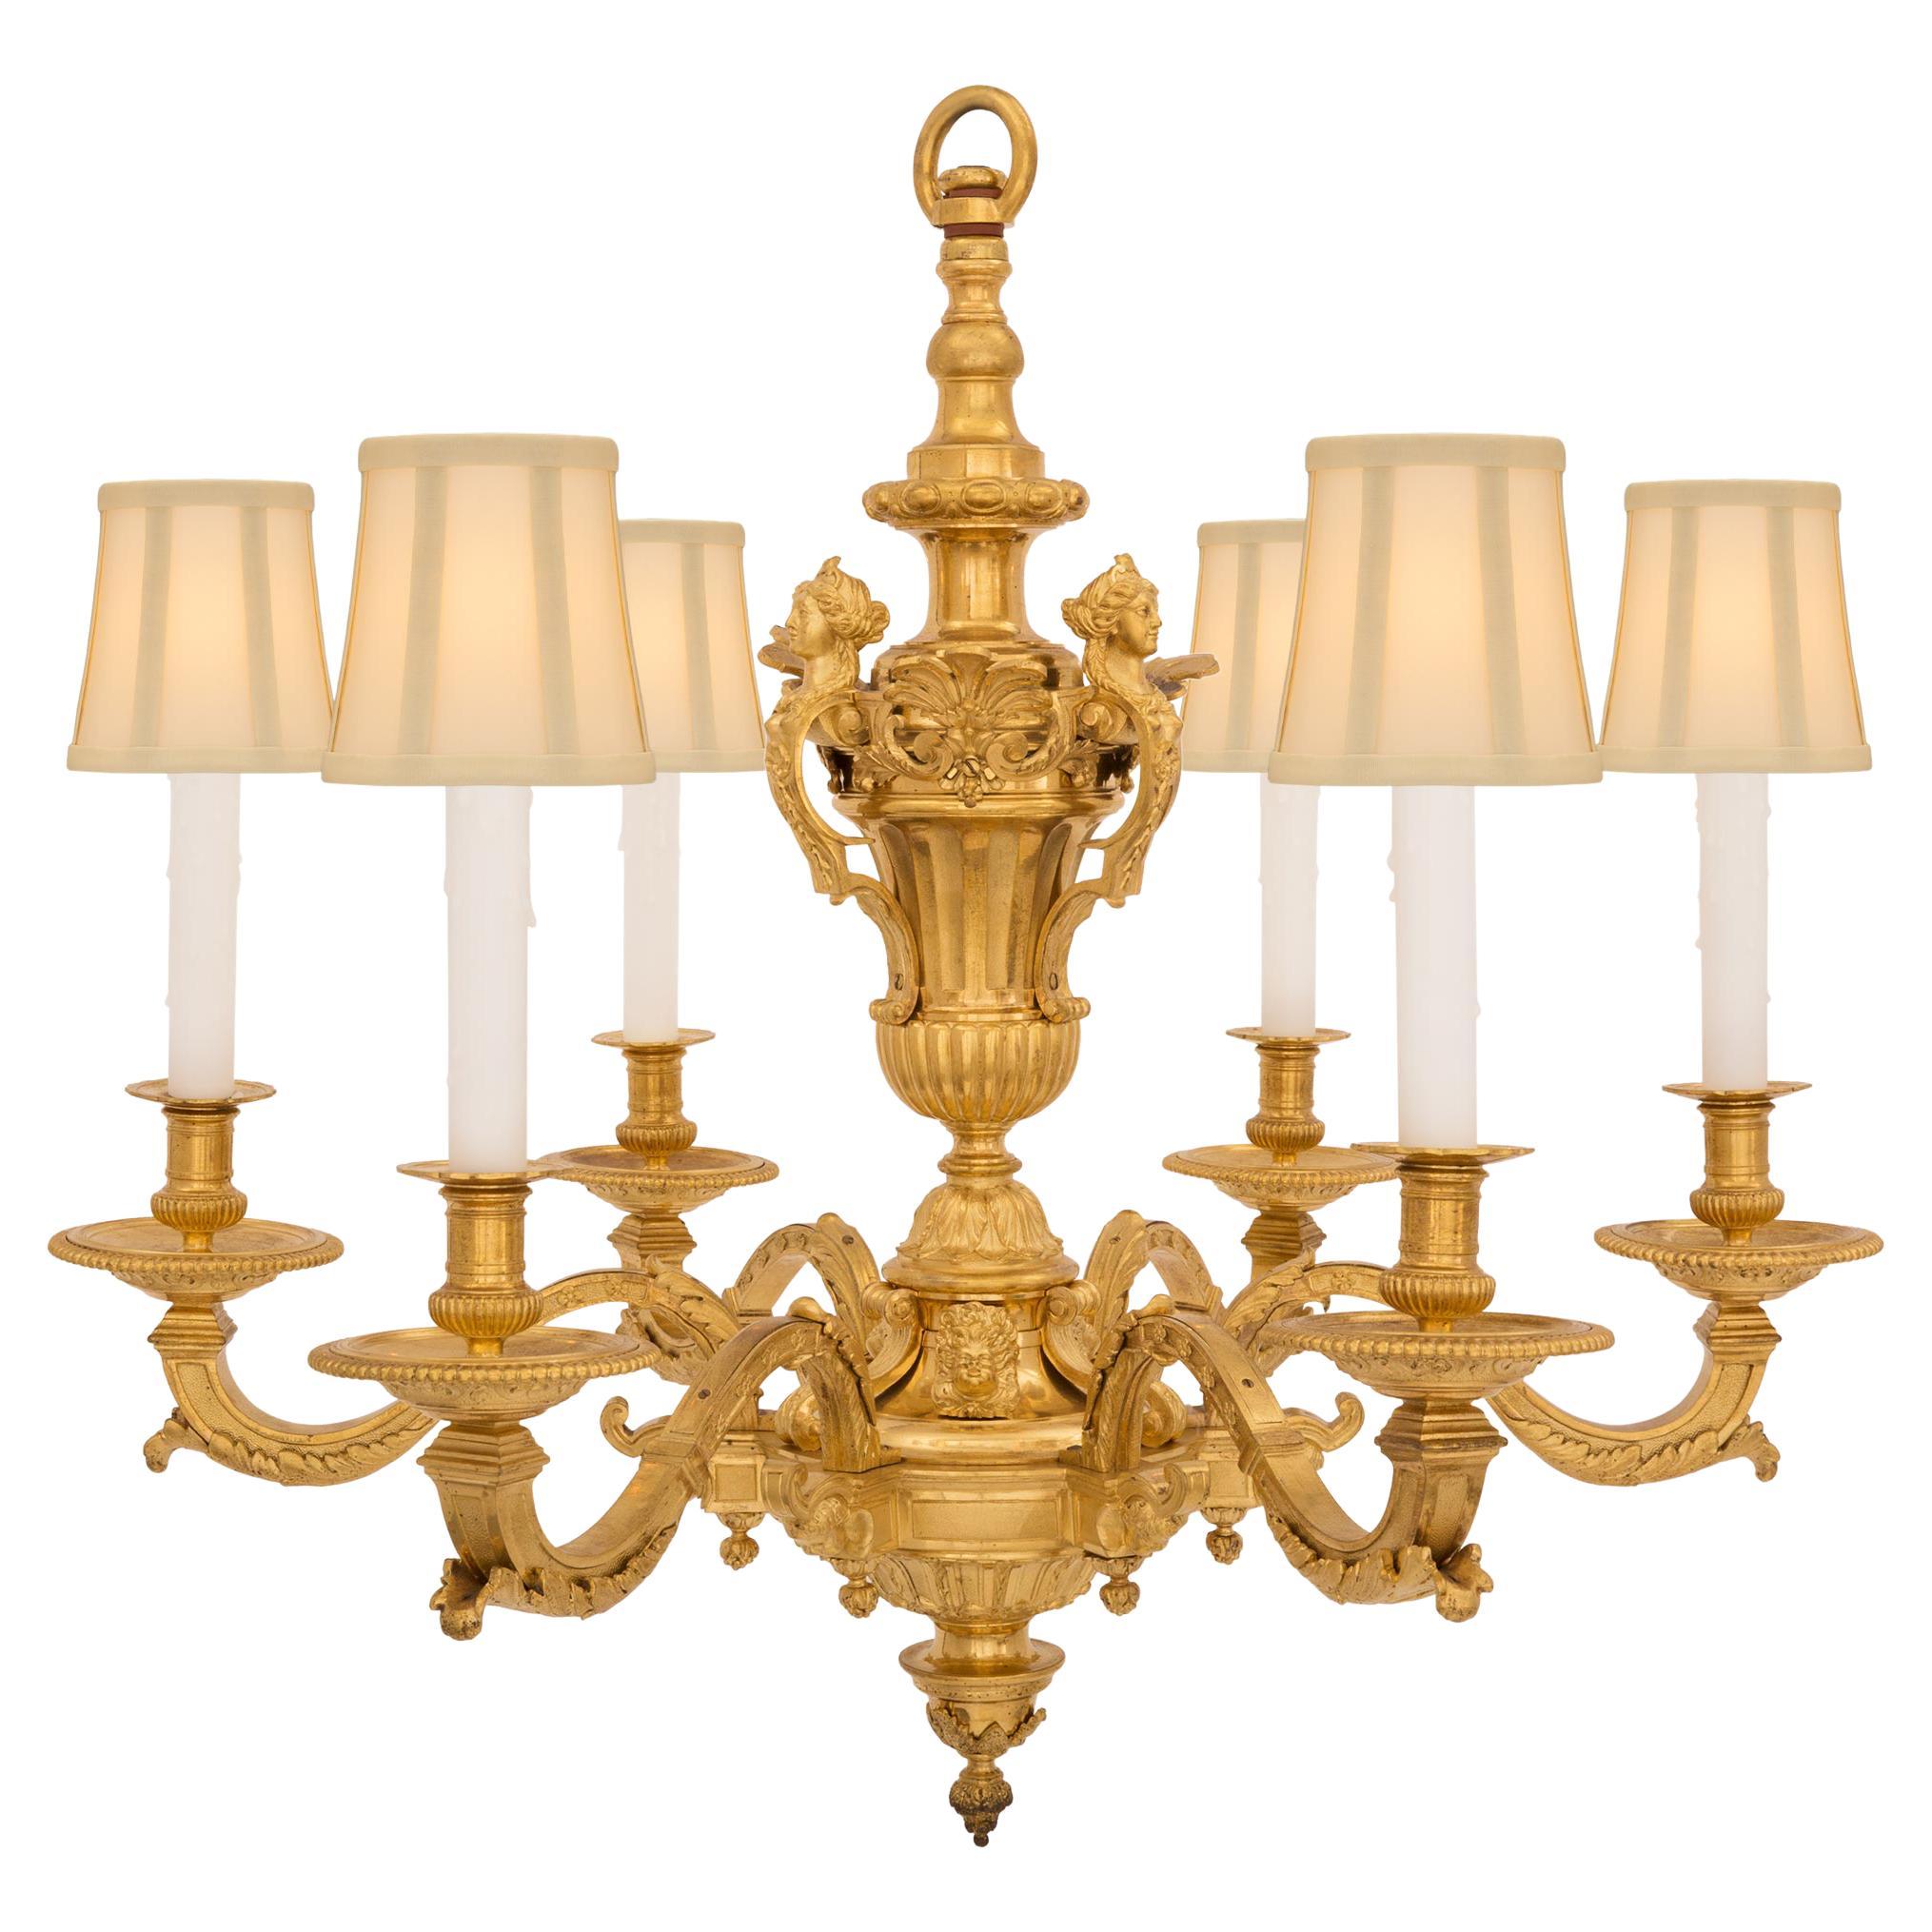 French Mid-19th Century, Louis XIV Style Eight-Arm Ormolu Chandelier For Sale